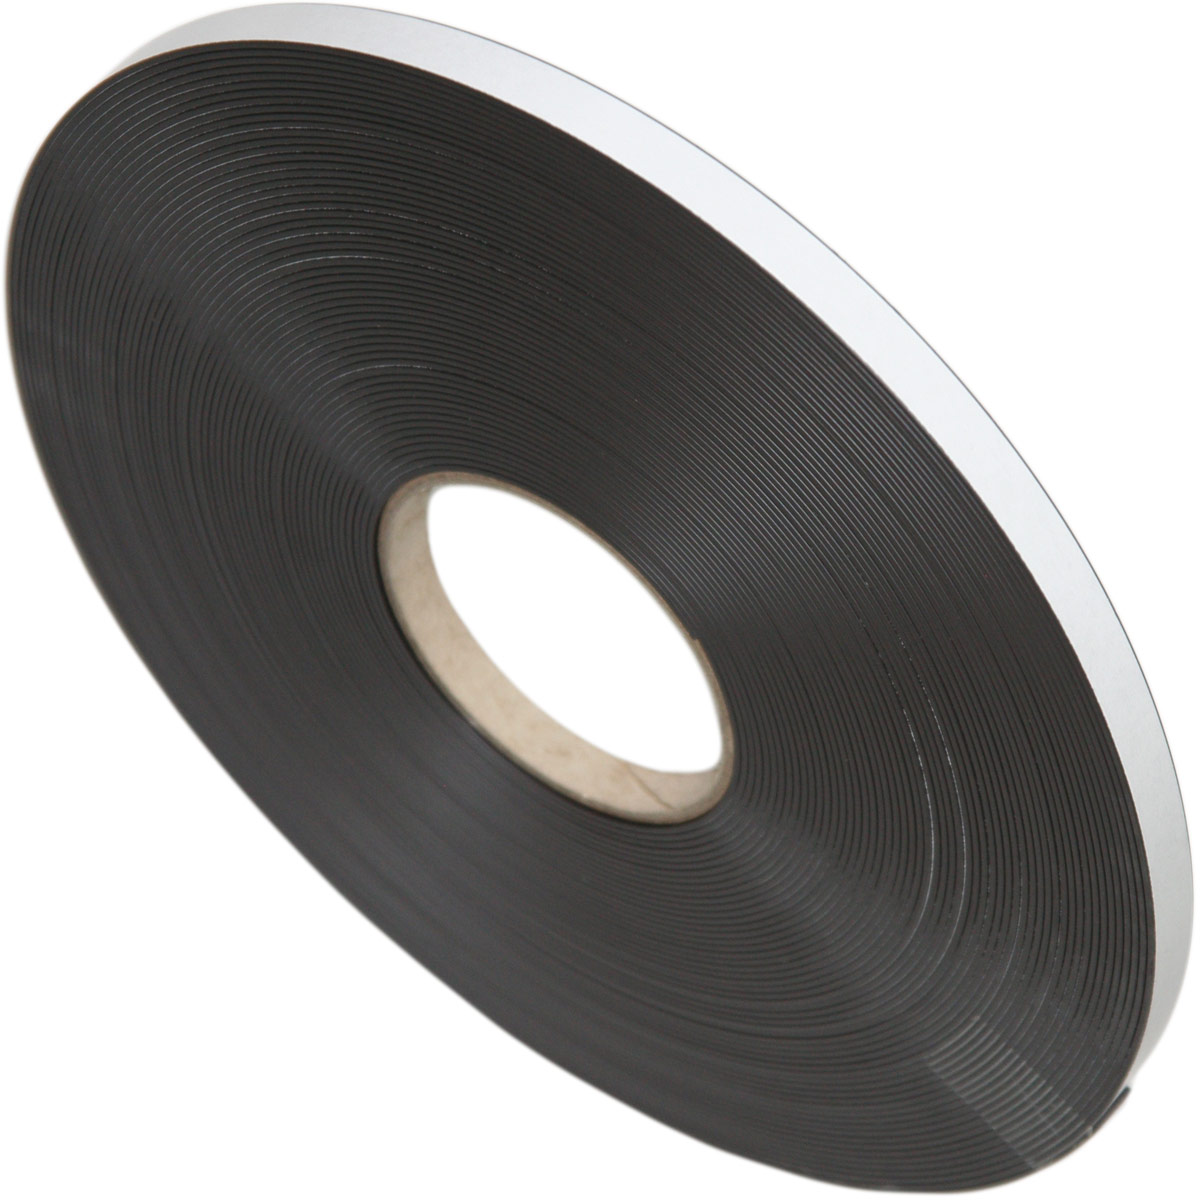 A4 1mm Double Sided Strong Magnetic Sheet for Metal Cutting Die